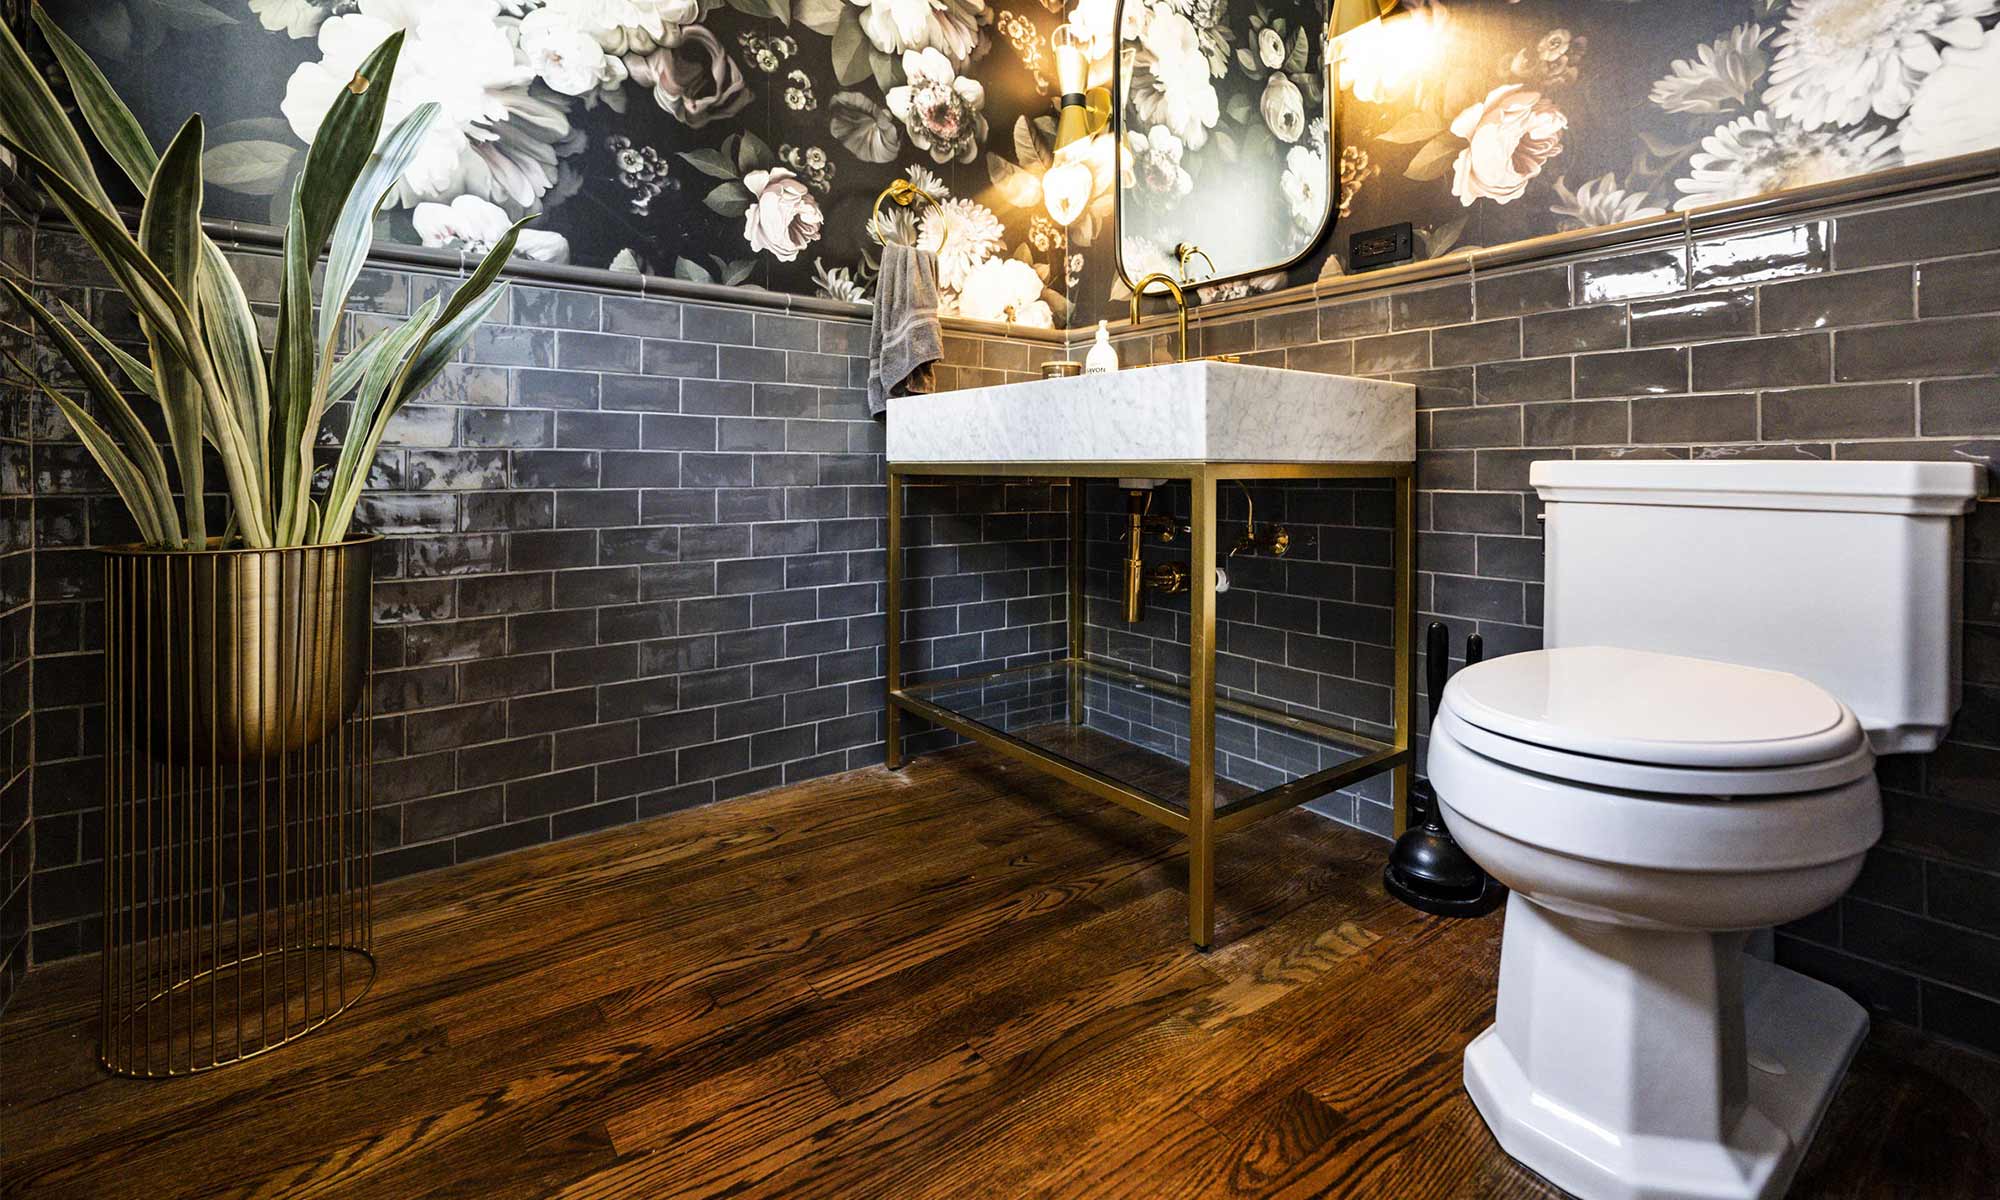 luxuty bathroom remodel with brass pedestal sink, dark subway tile wainscot, and floral wallpaper